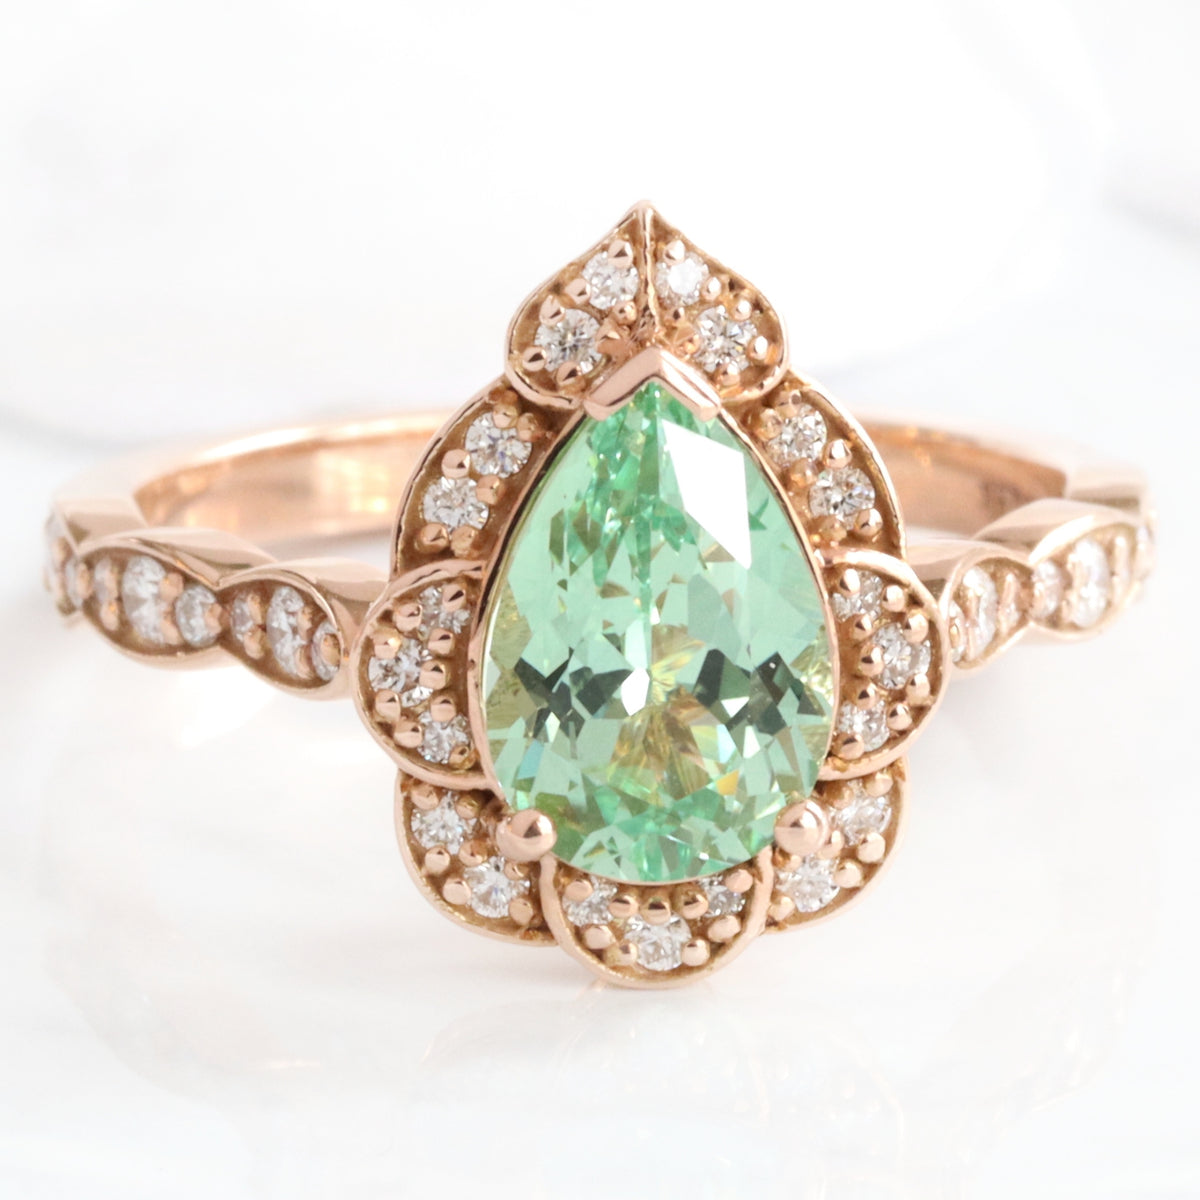 Large pear green sapphire engagement ring rose gold vintage halo diamond sapphire ring la more design jewelry